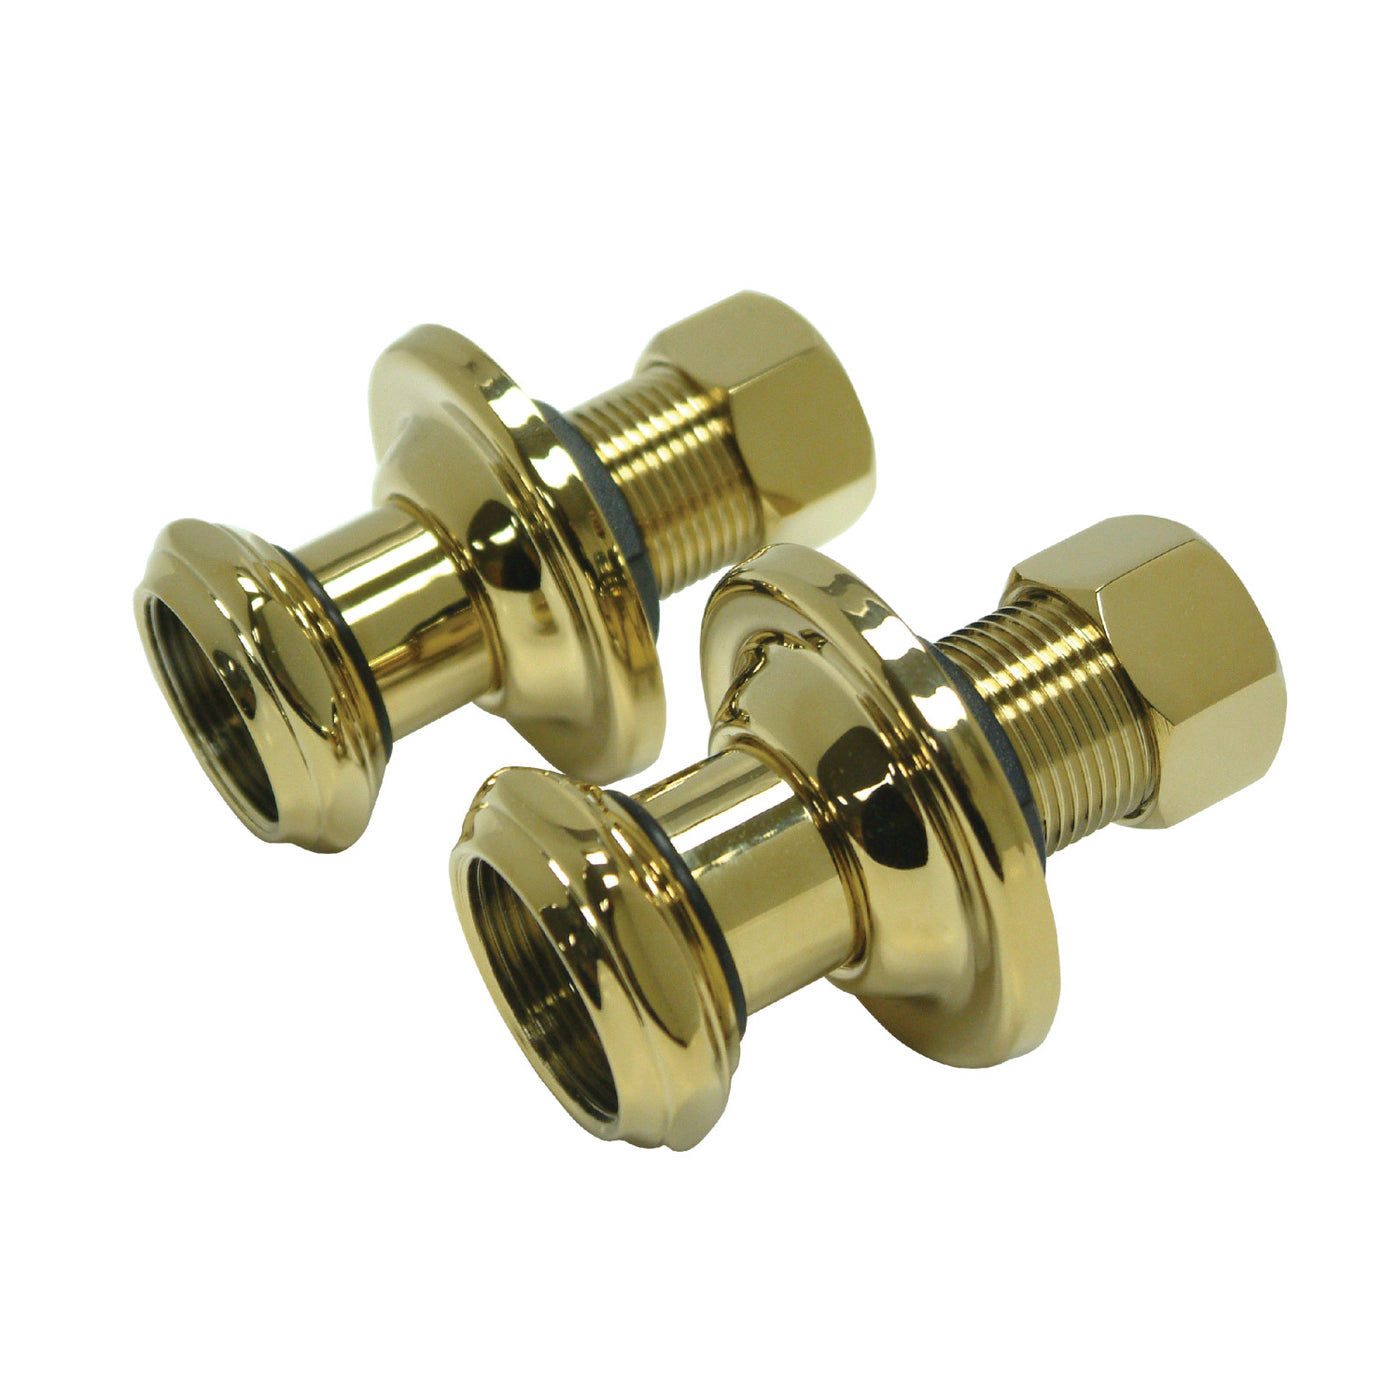 Elements of Design DSU4102 Wall Union Extension, 1-3/4 inch, Polished Brass